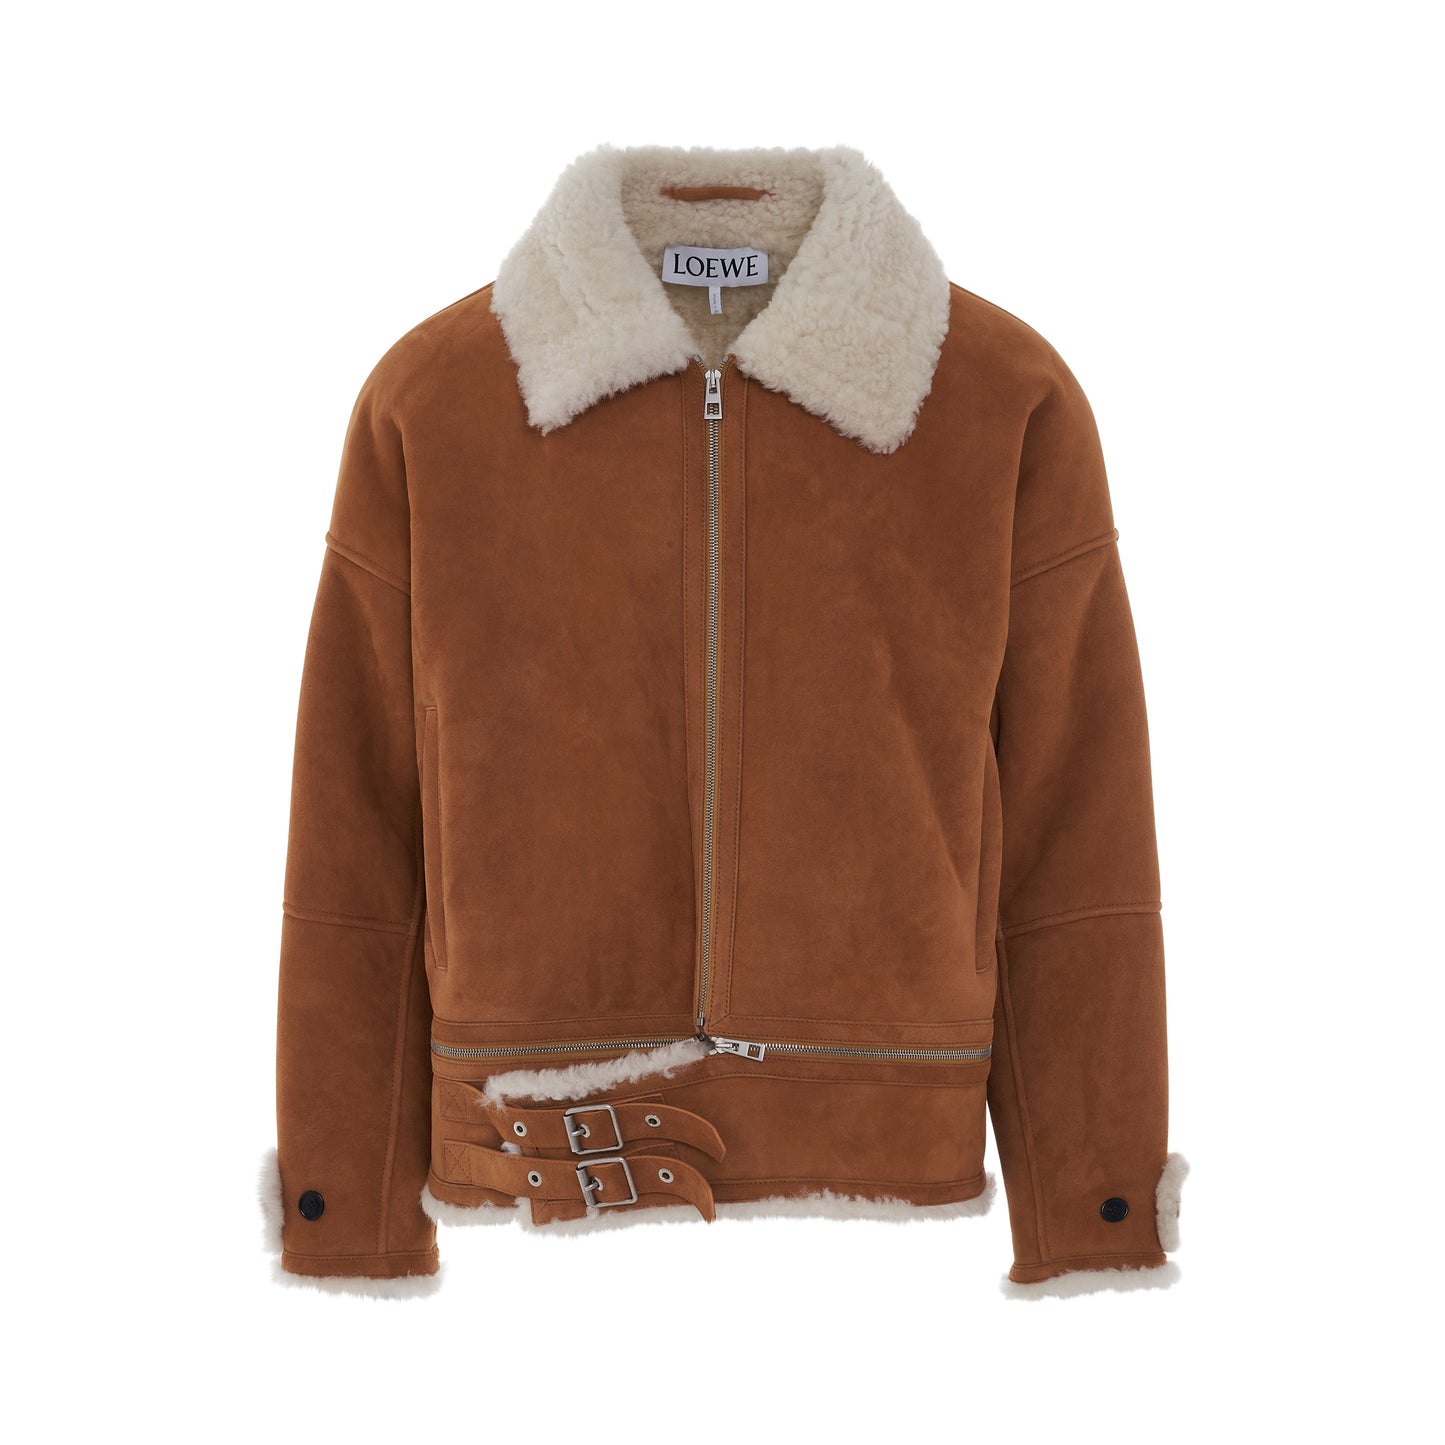 Shearling Zipped Jacket in White/Camel